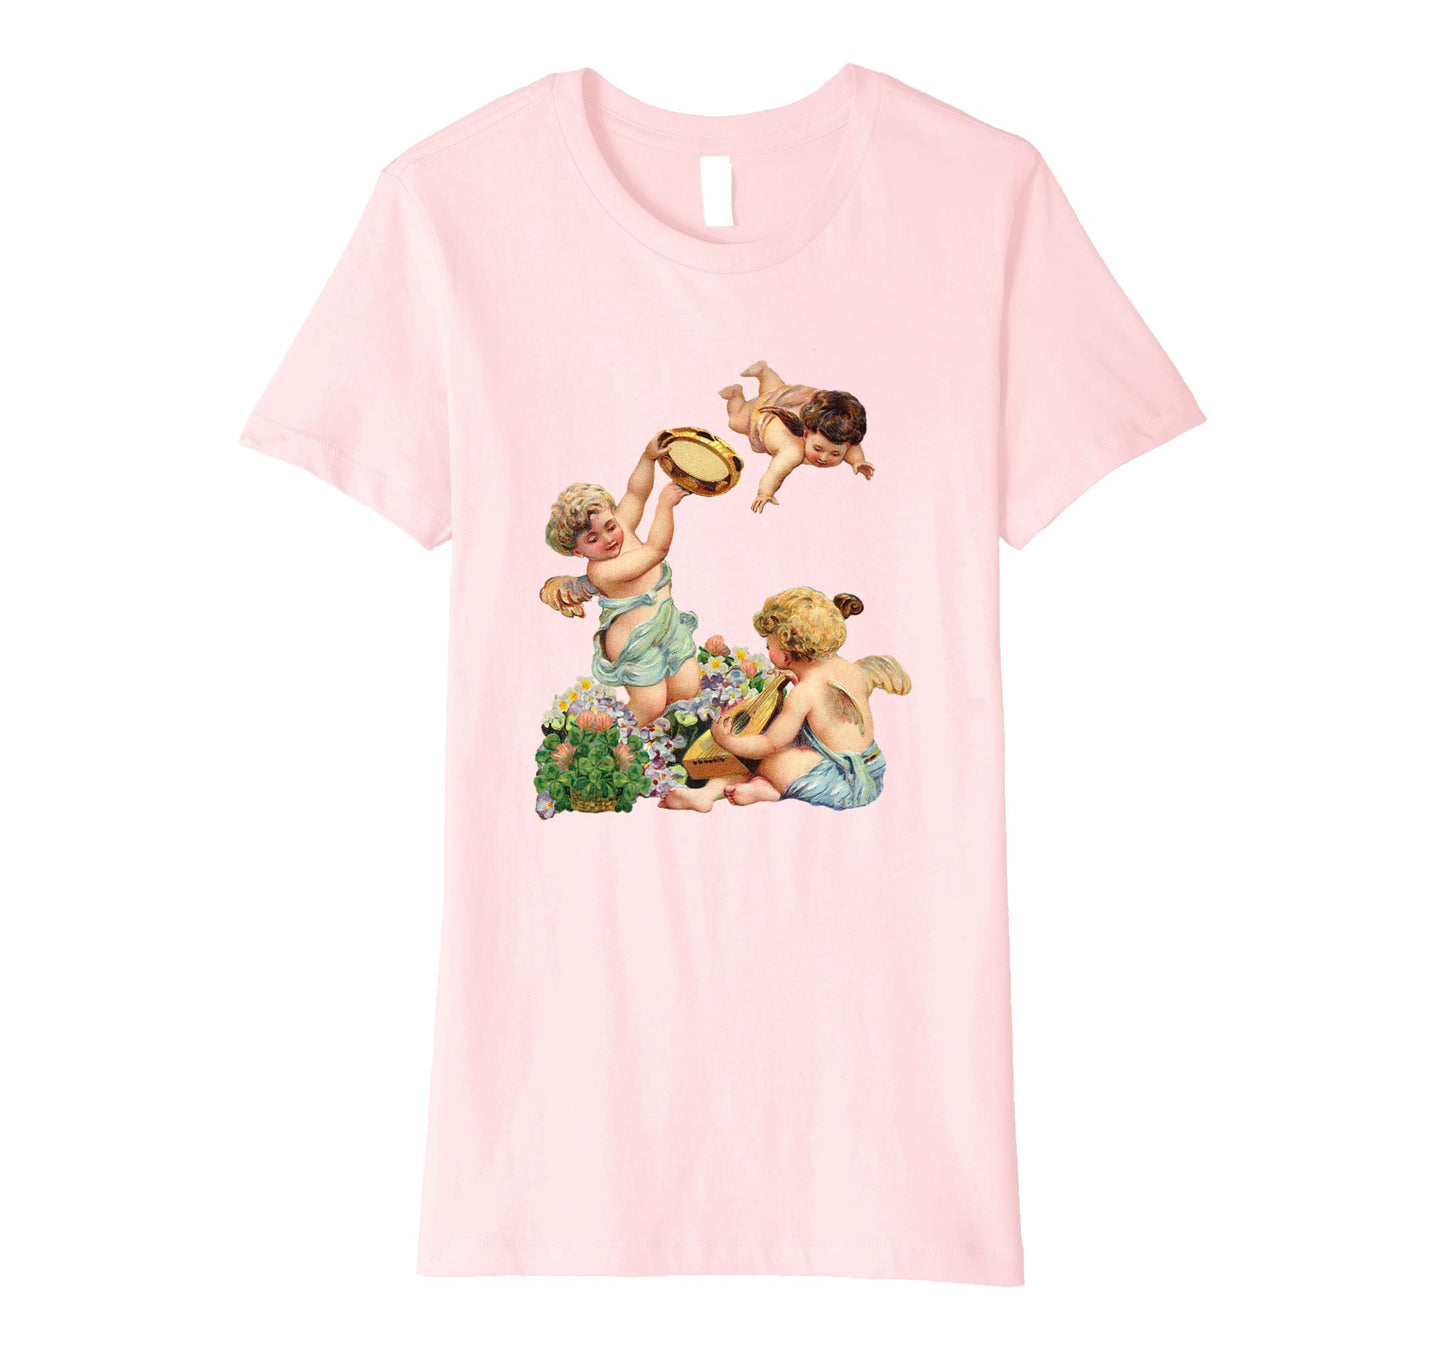 Womens Cotton Tee T-shirt Gift for Mom with Cherubs Playing Music Art Pink